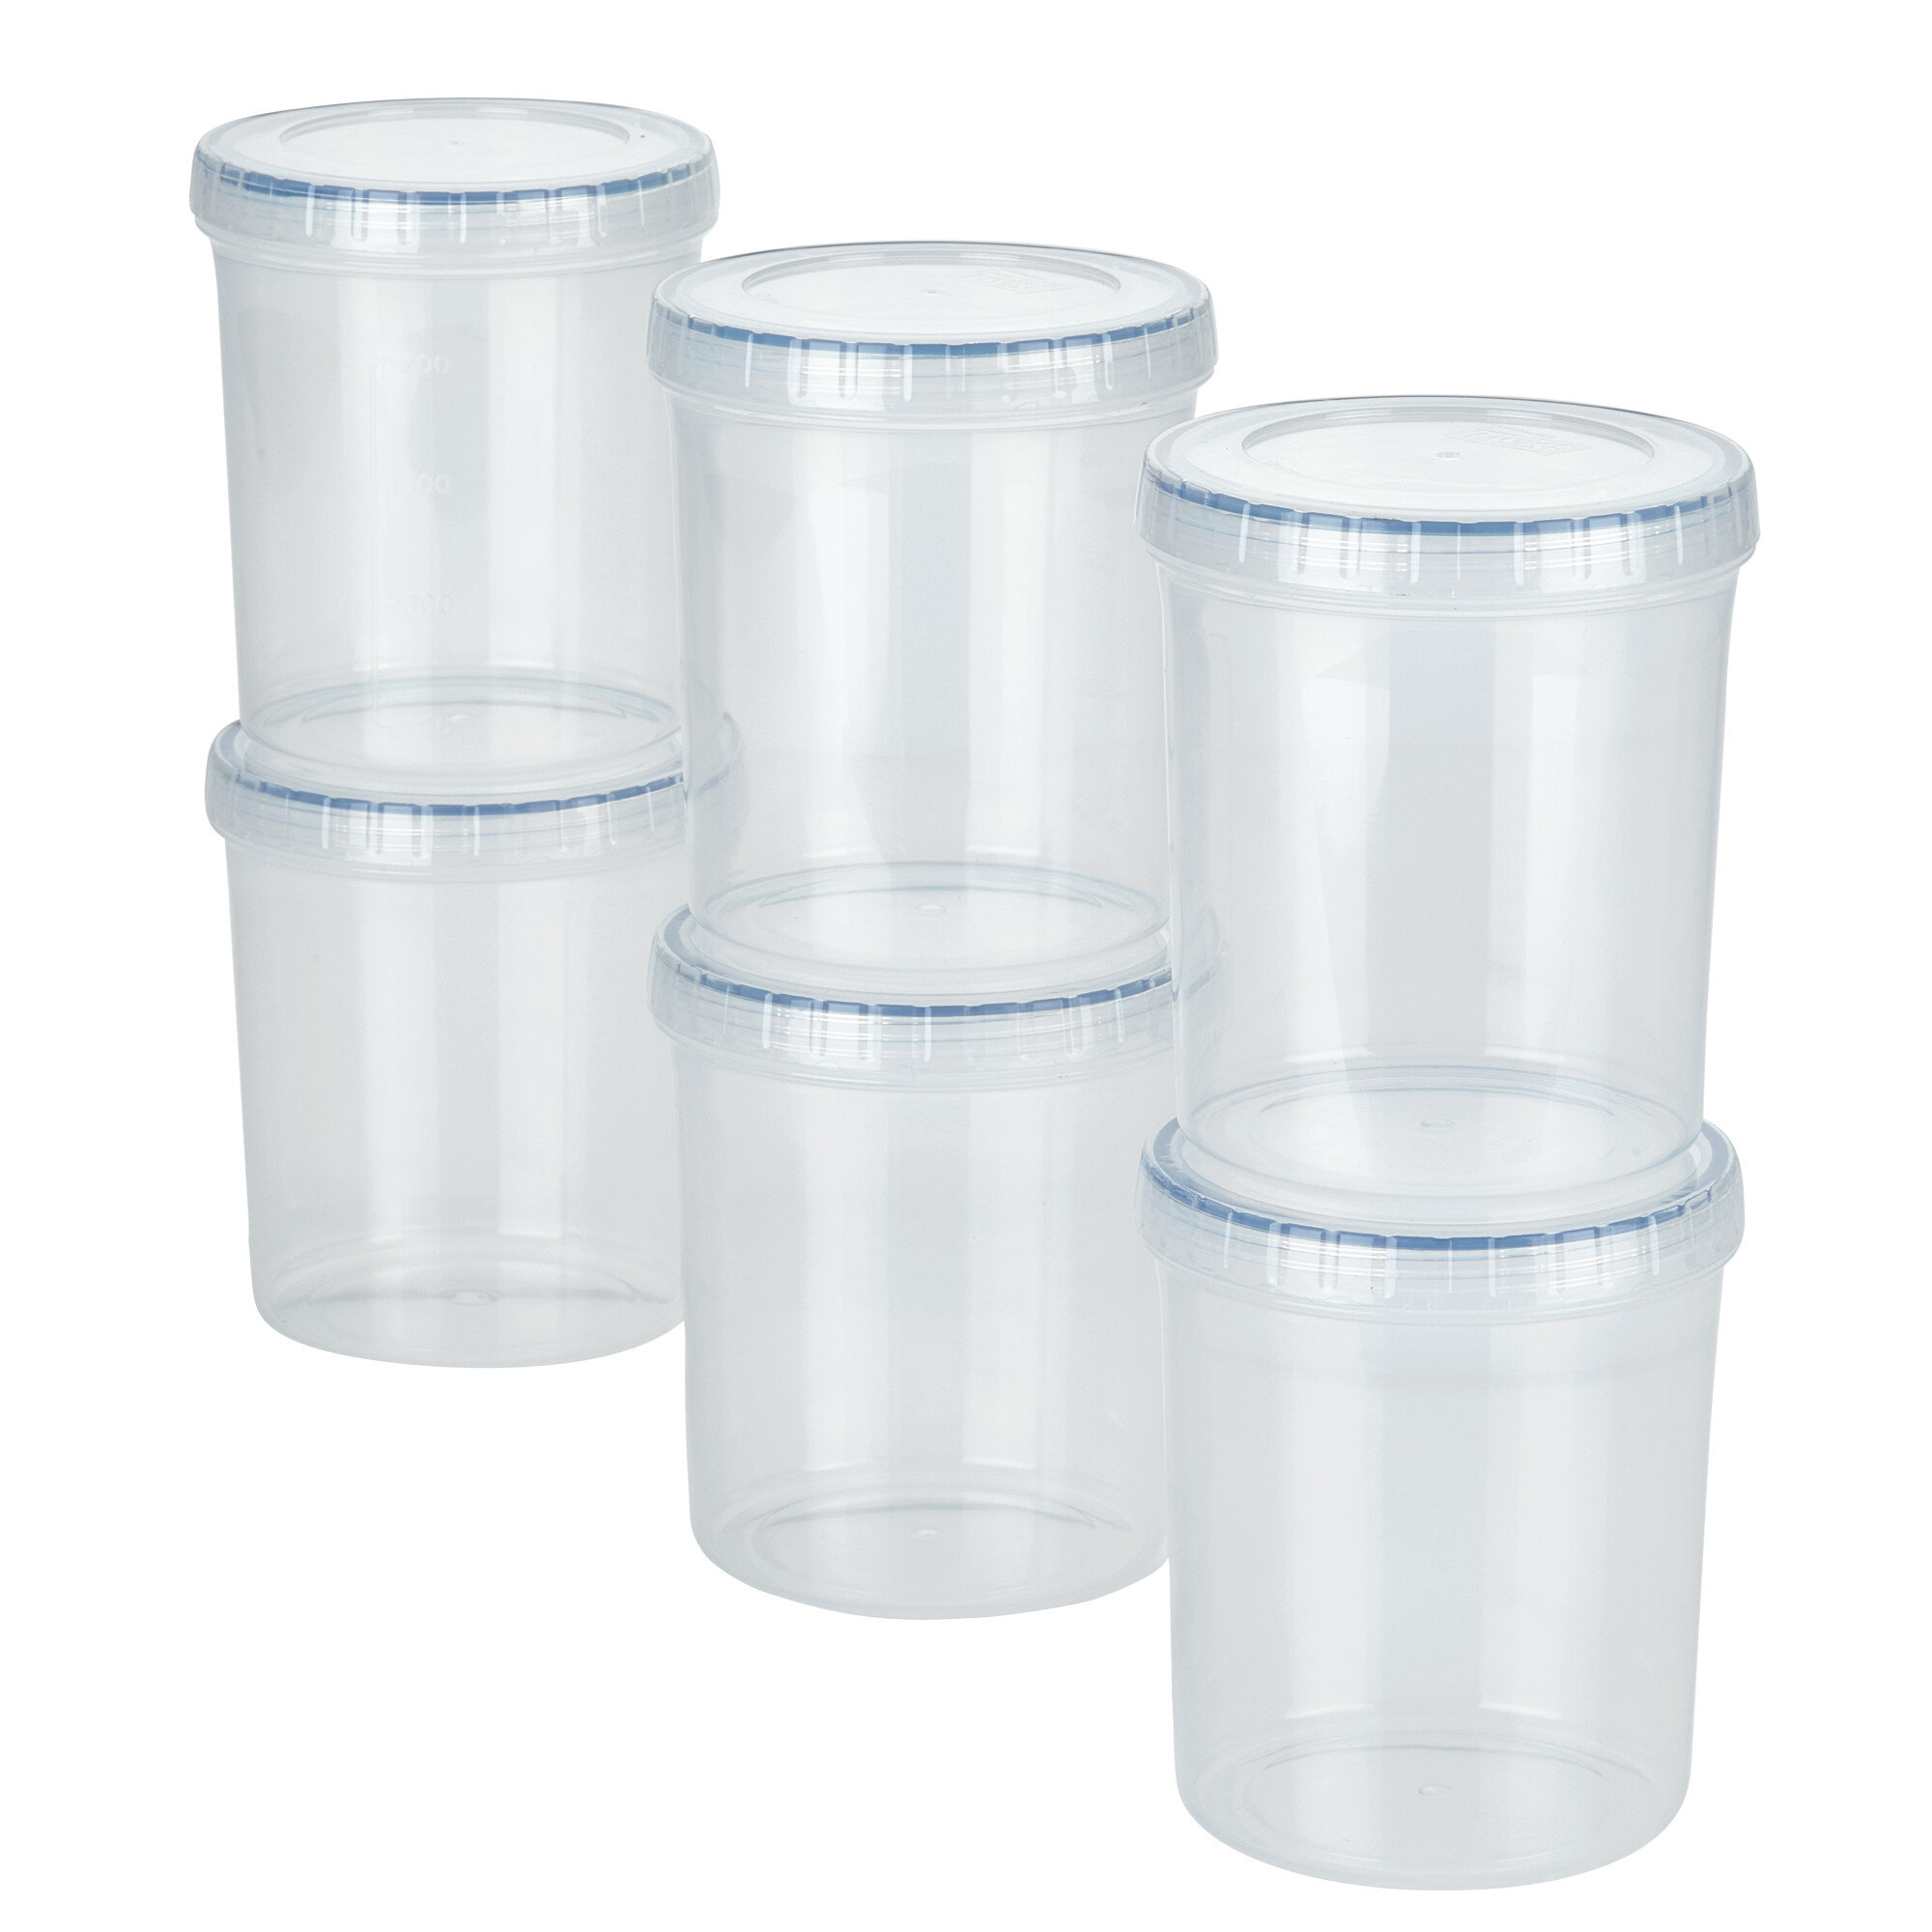 [12 PACK] 32 oz Twist Top Storage Deli Containers - Airtight Reusable  Plastic Food Storage Canisters with Twist & Seal Lids, Leak-Proof - Meal  Prep